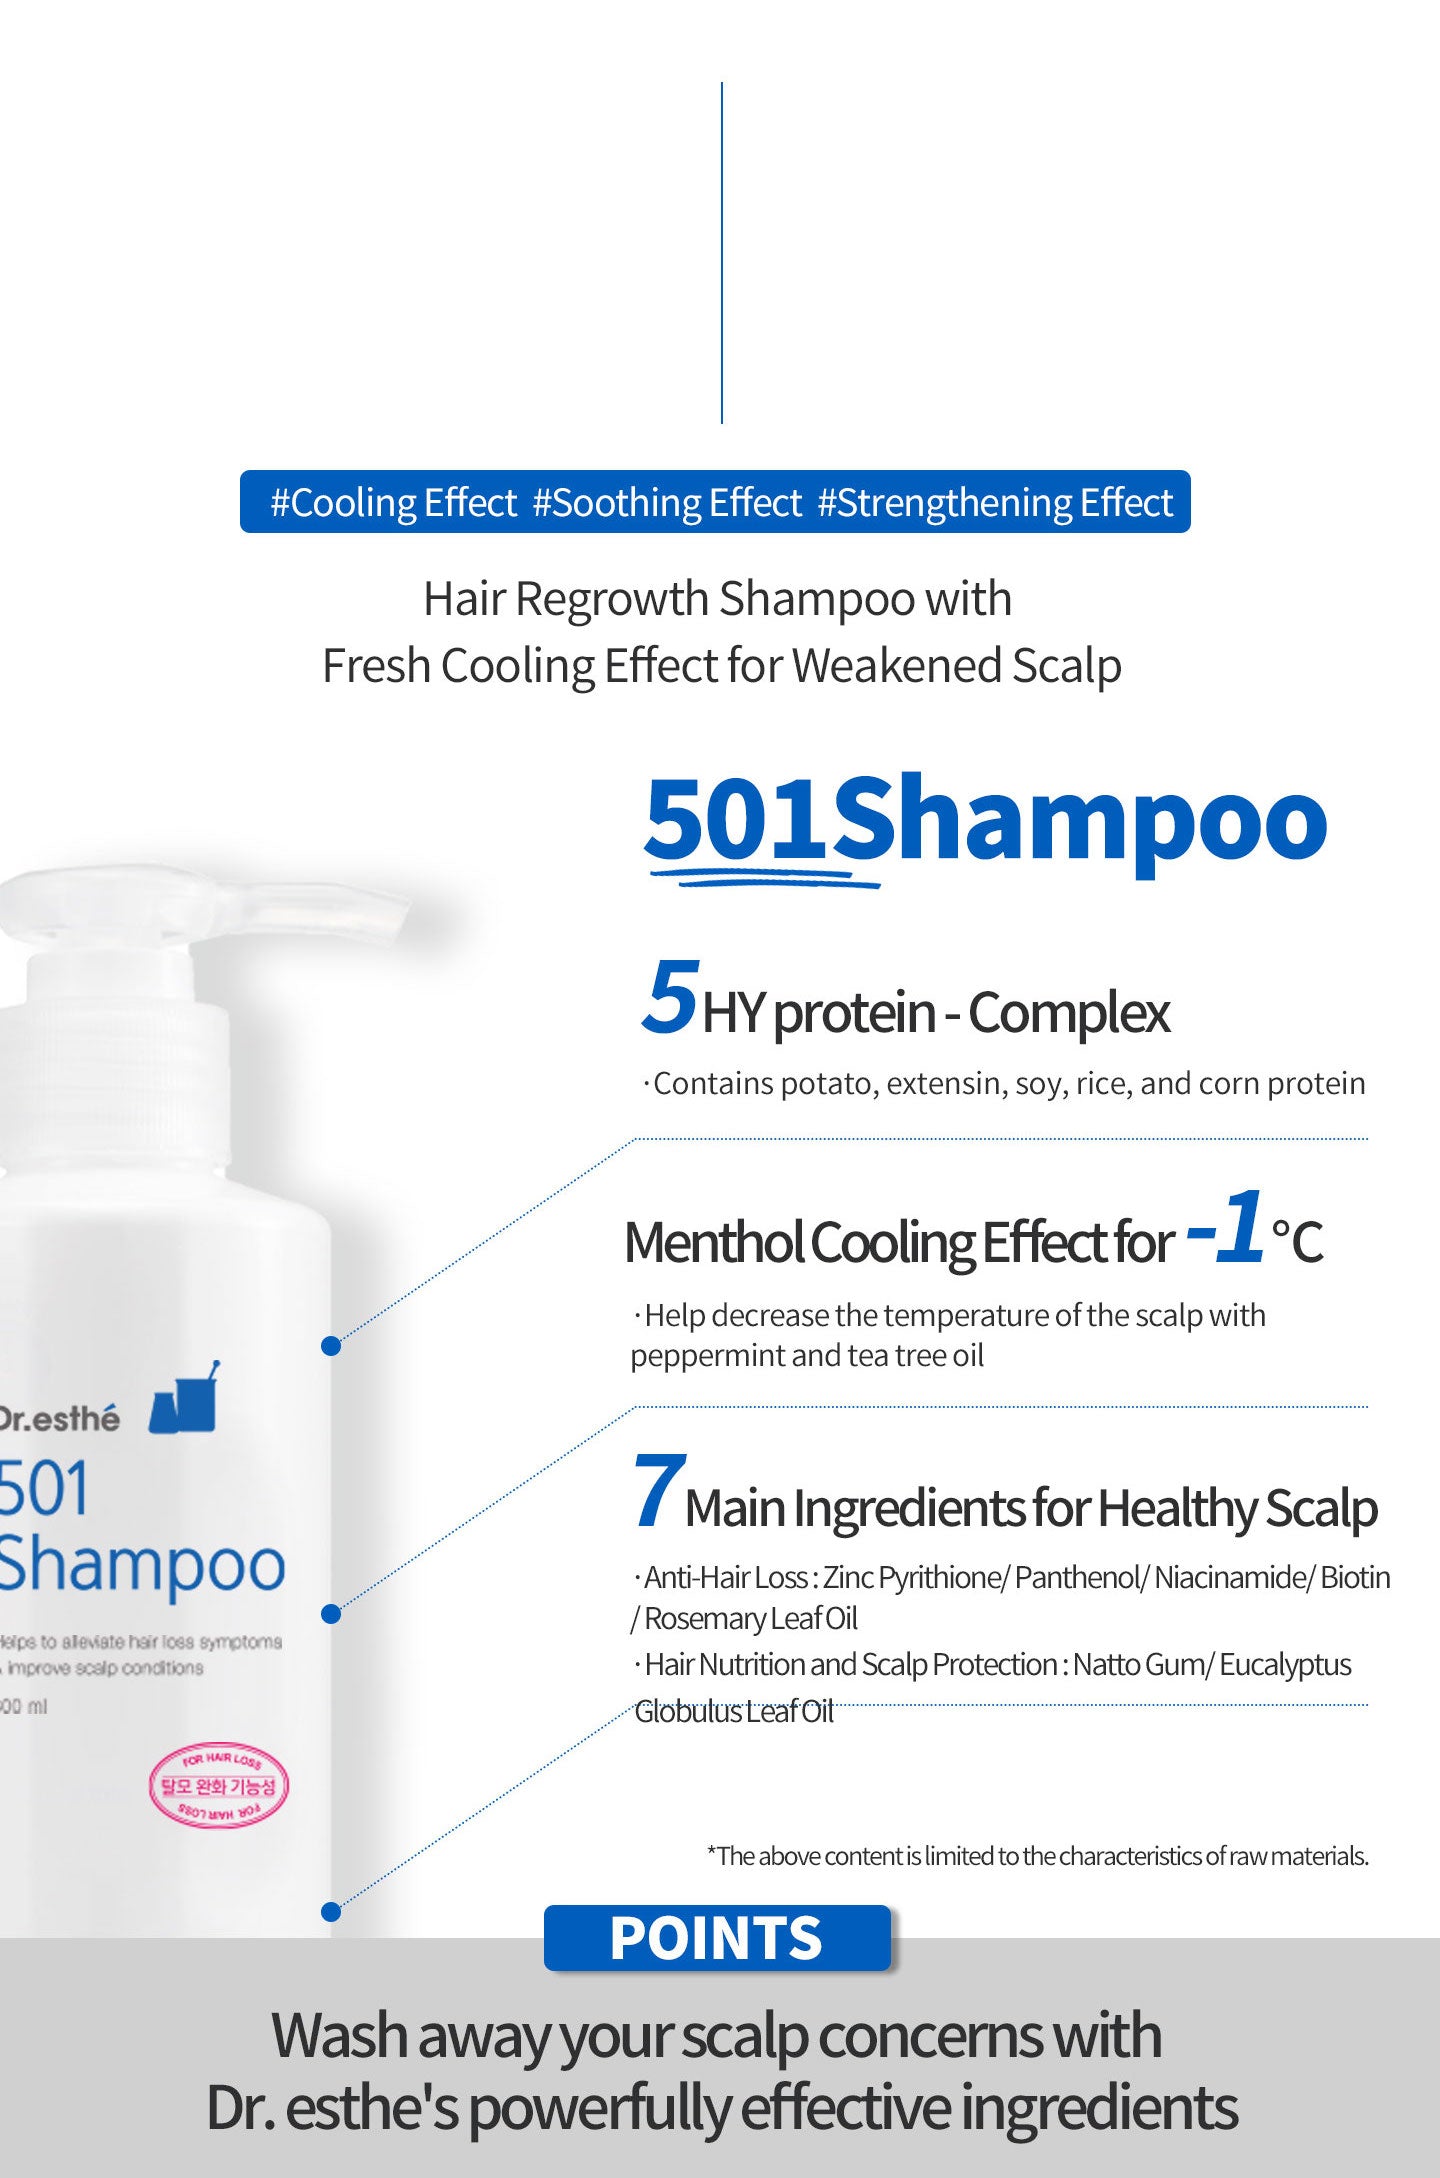 Hair regrowth shampoo with fresh cooling effect for weakened scalp. 5 HY Protein - complex. Menthol cooling effect for -1 degree. 7 main ingredients for healthy scalp. Wash away your scalp concerns with Dr.esthe's powerfully effective ingredients.  